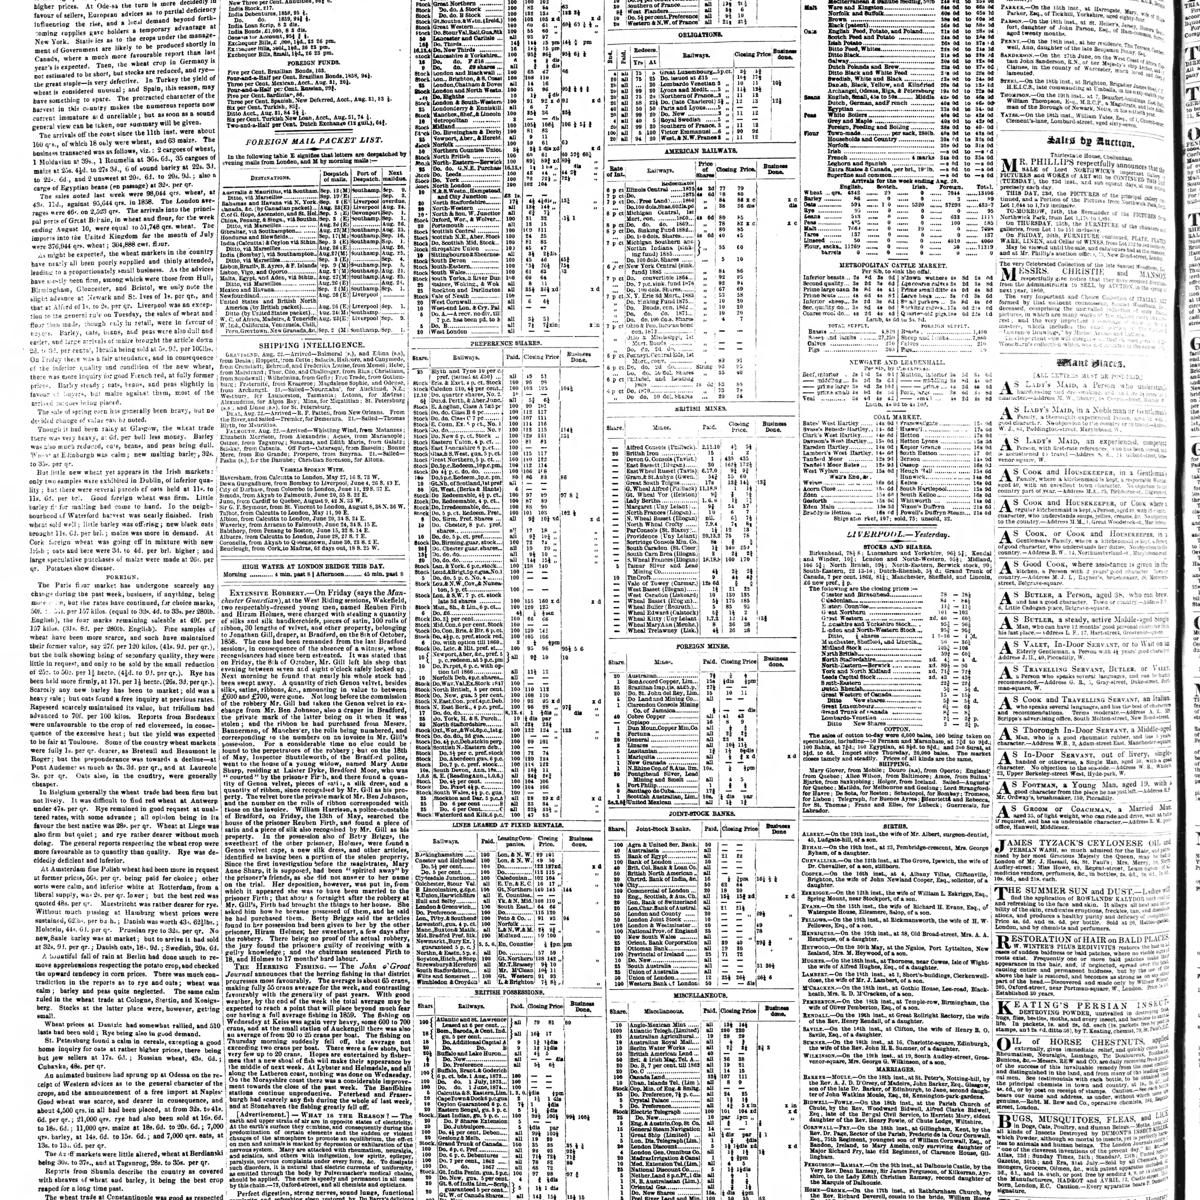 The Morning Post, 1859-08-23, page 8